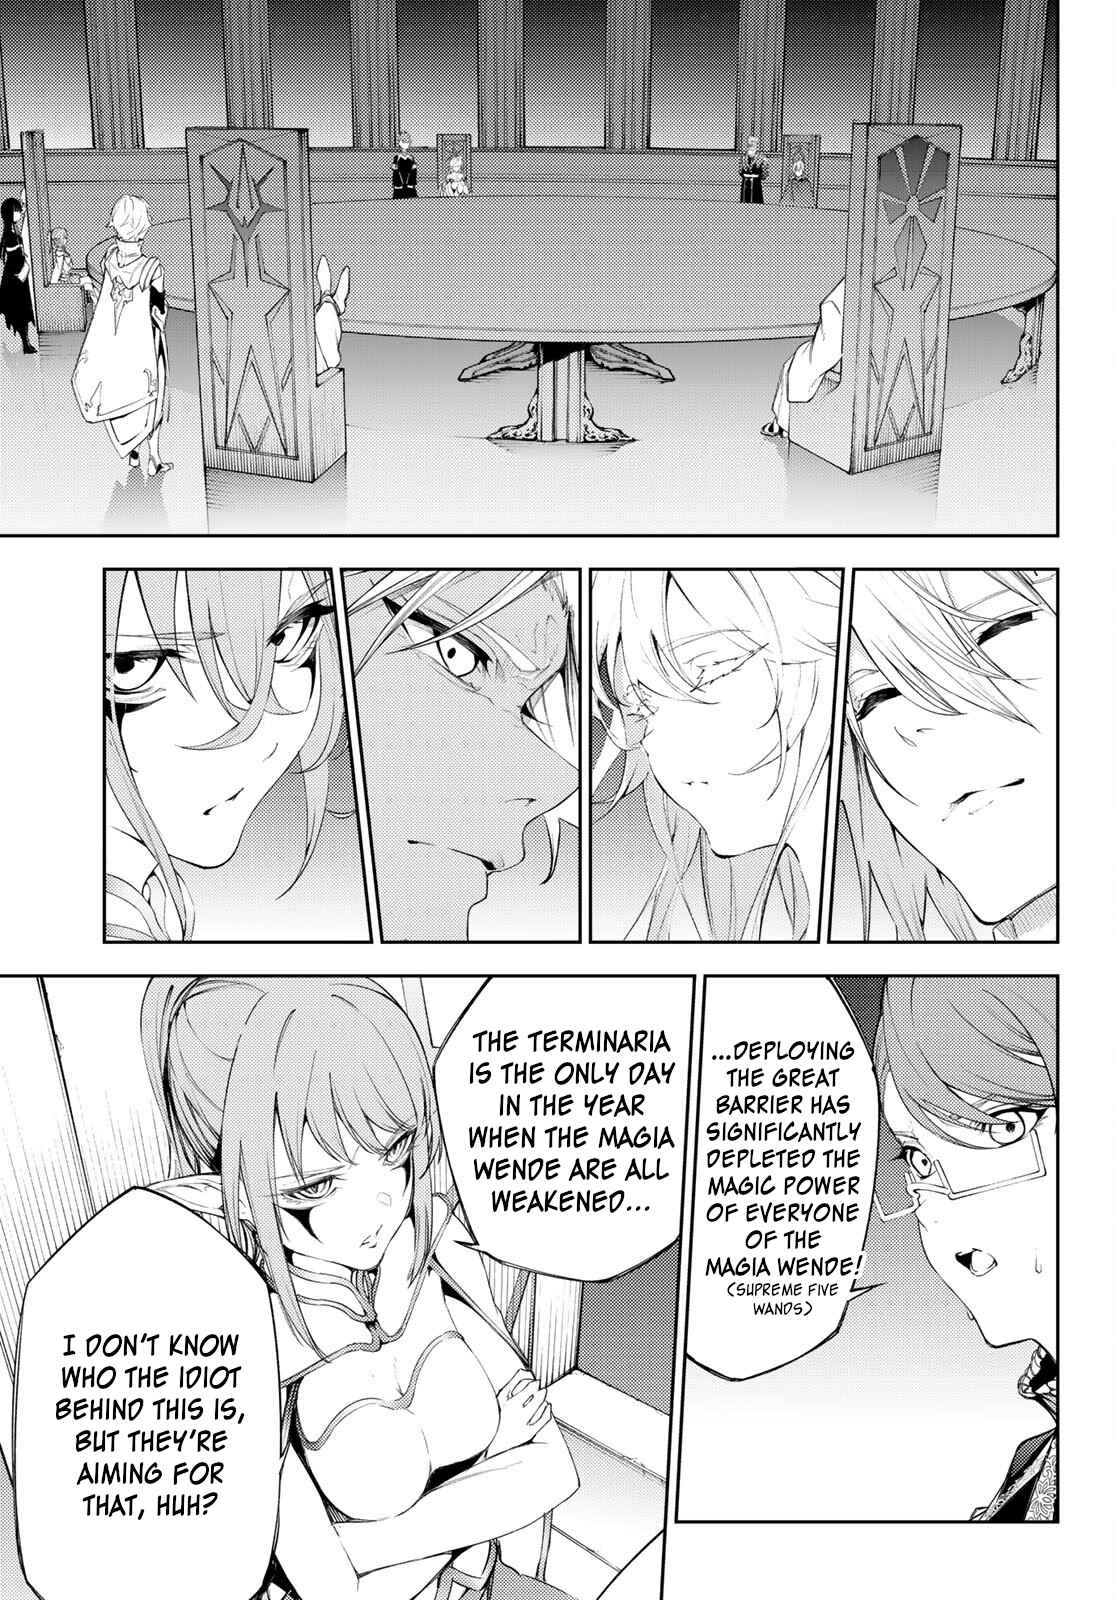 Wistoria's Wand and Sword Chapter 23-eng-li - Page 21